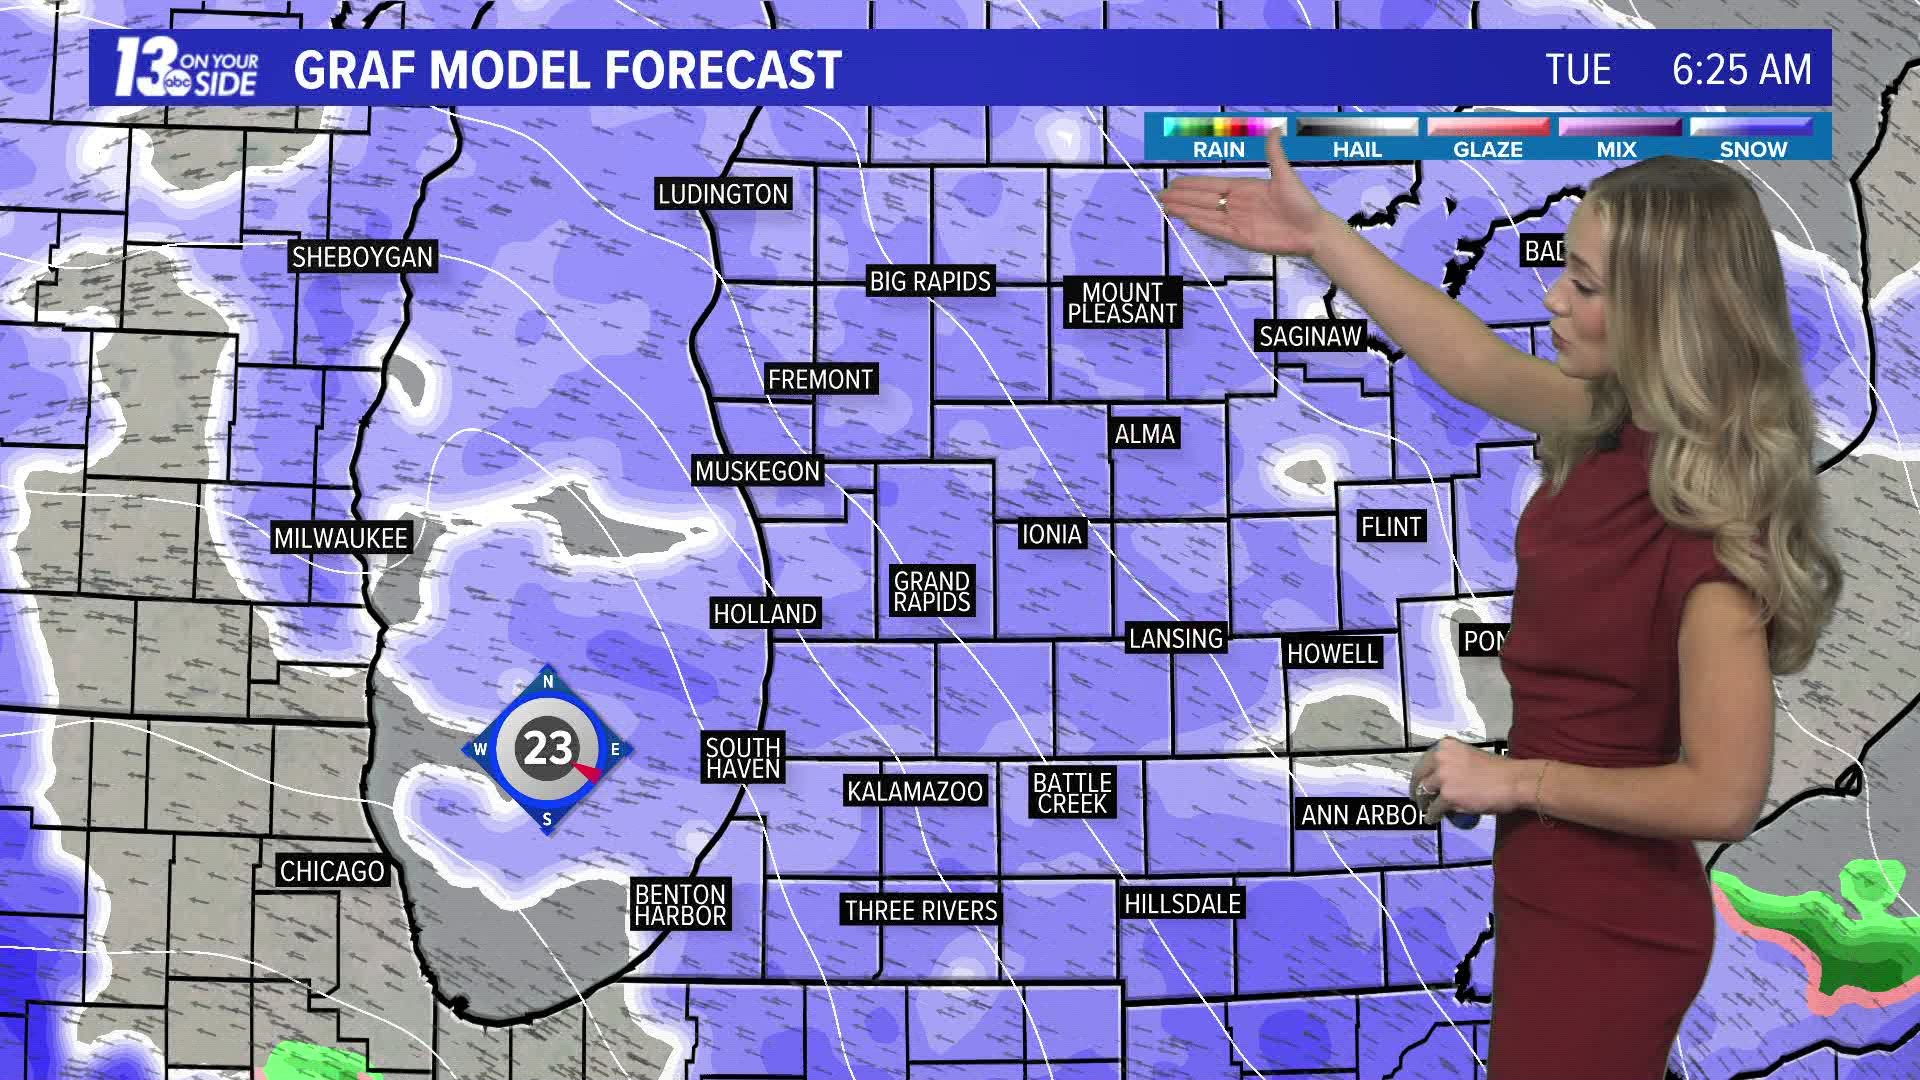 Three rounds of accumulating snowfall are expected this week! Meteorologist Samantha Jacques has the details.